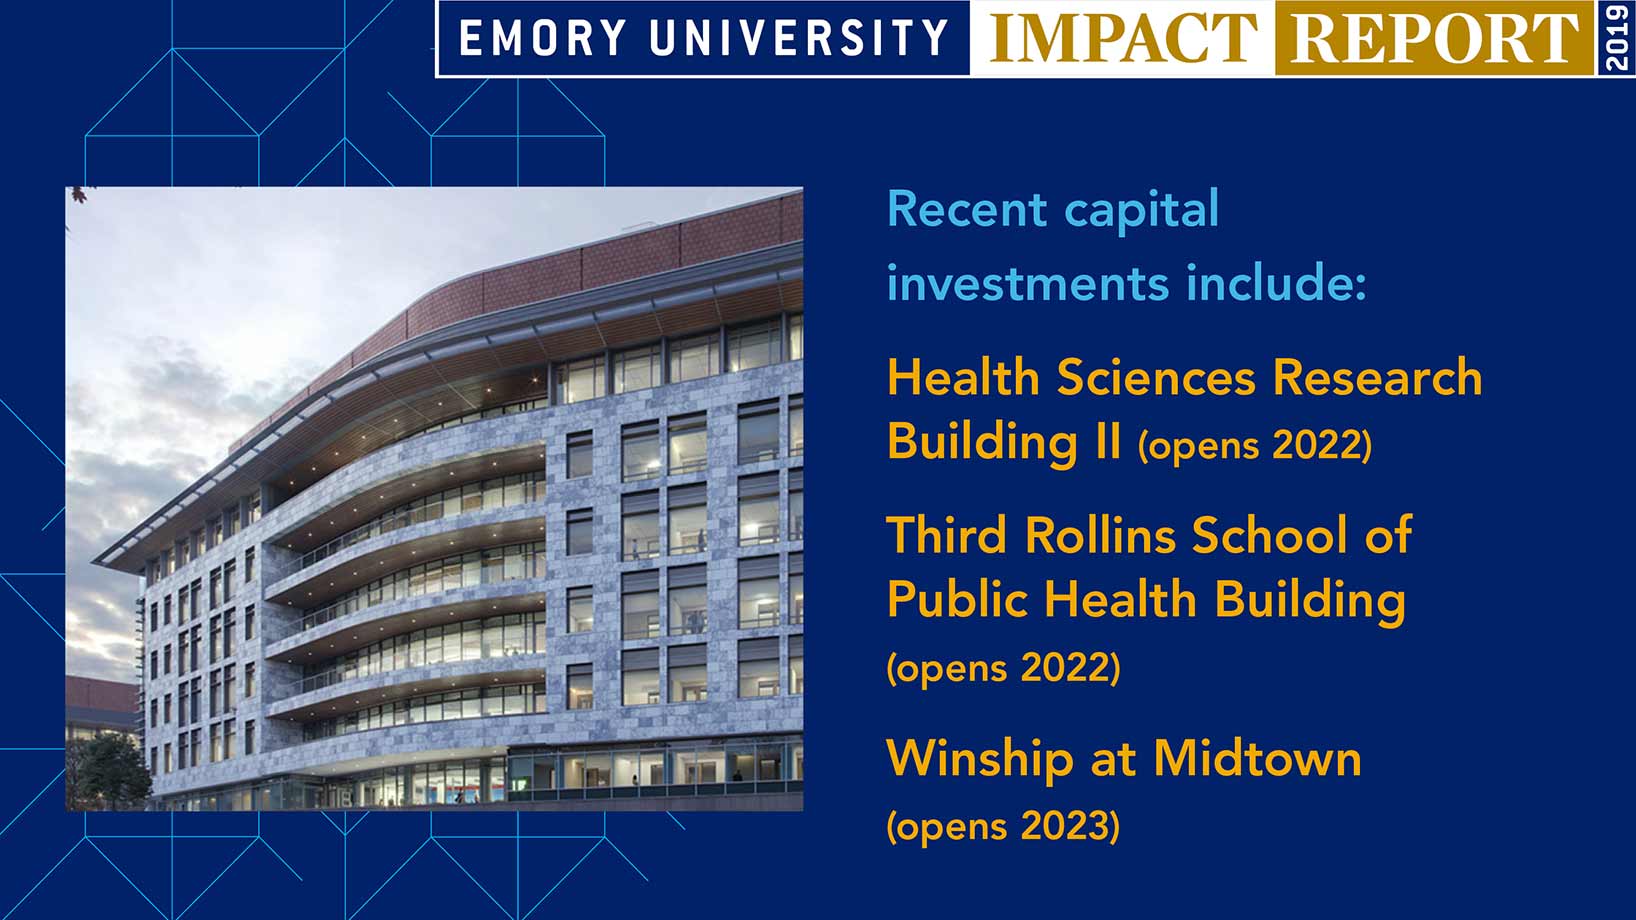 Recent capital investments include: Health Sciences Research Building II (opens 2022) Creating an innovative environment for tackling problems in biomedical research and human health; Third Rollins School of Public Health building (opens 2022) Providing new learning, training, and conference opportunities; Winship at Midtown (opens 2023) Allowing more personalized cancer care